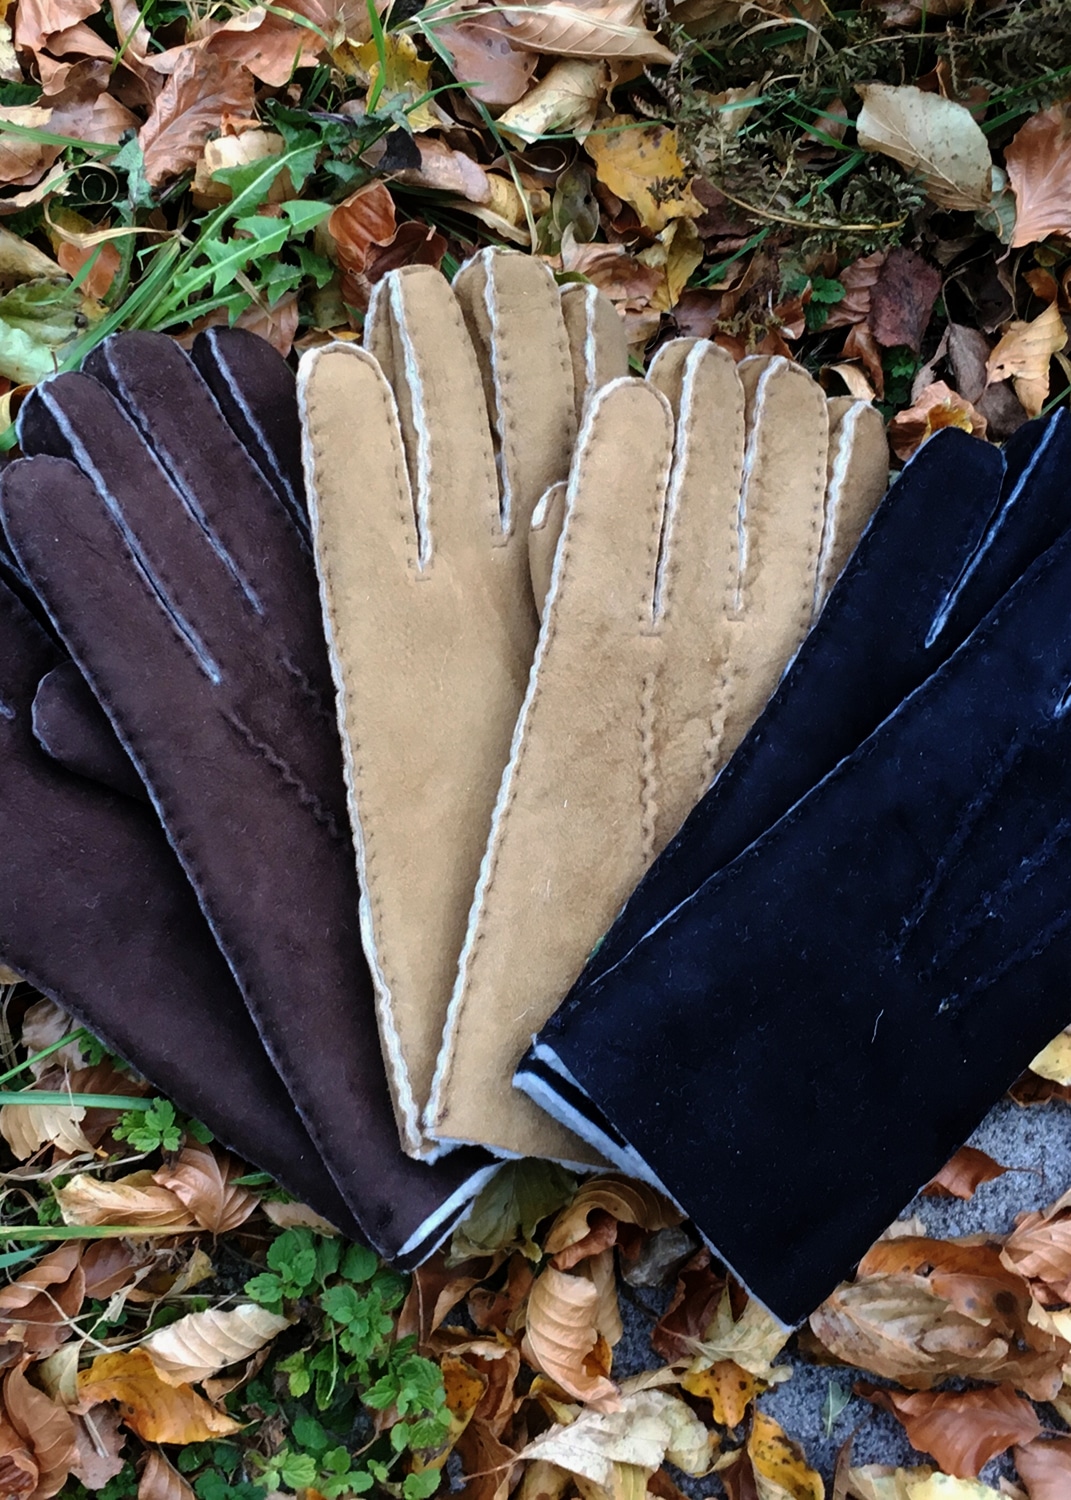 Mens Gents Luxury Hand Made Sewn Genuine Soft Real Lambskin Winter Gloves